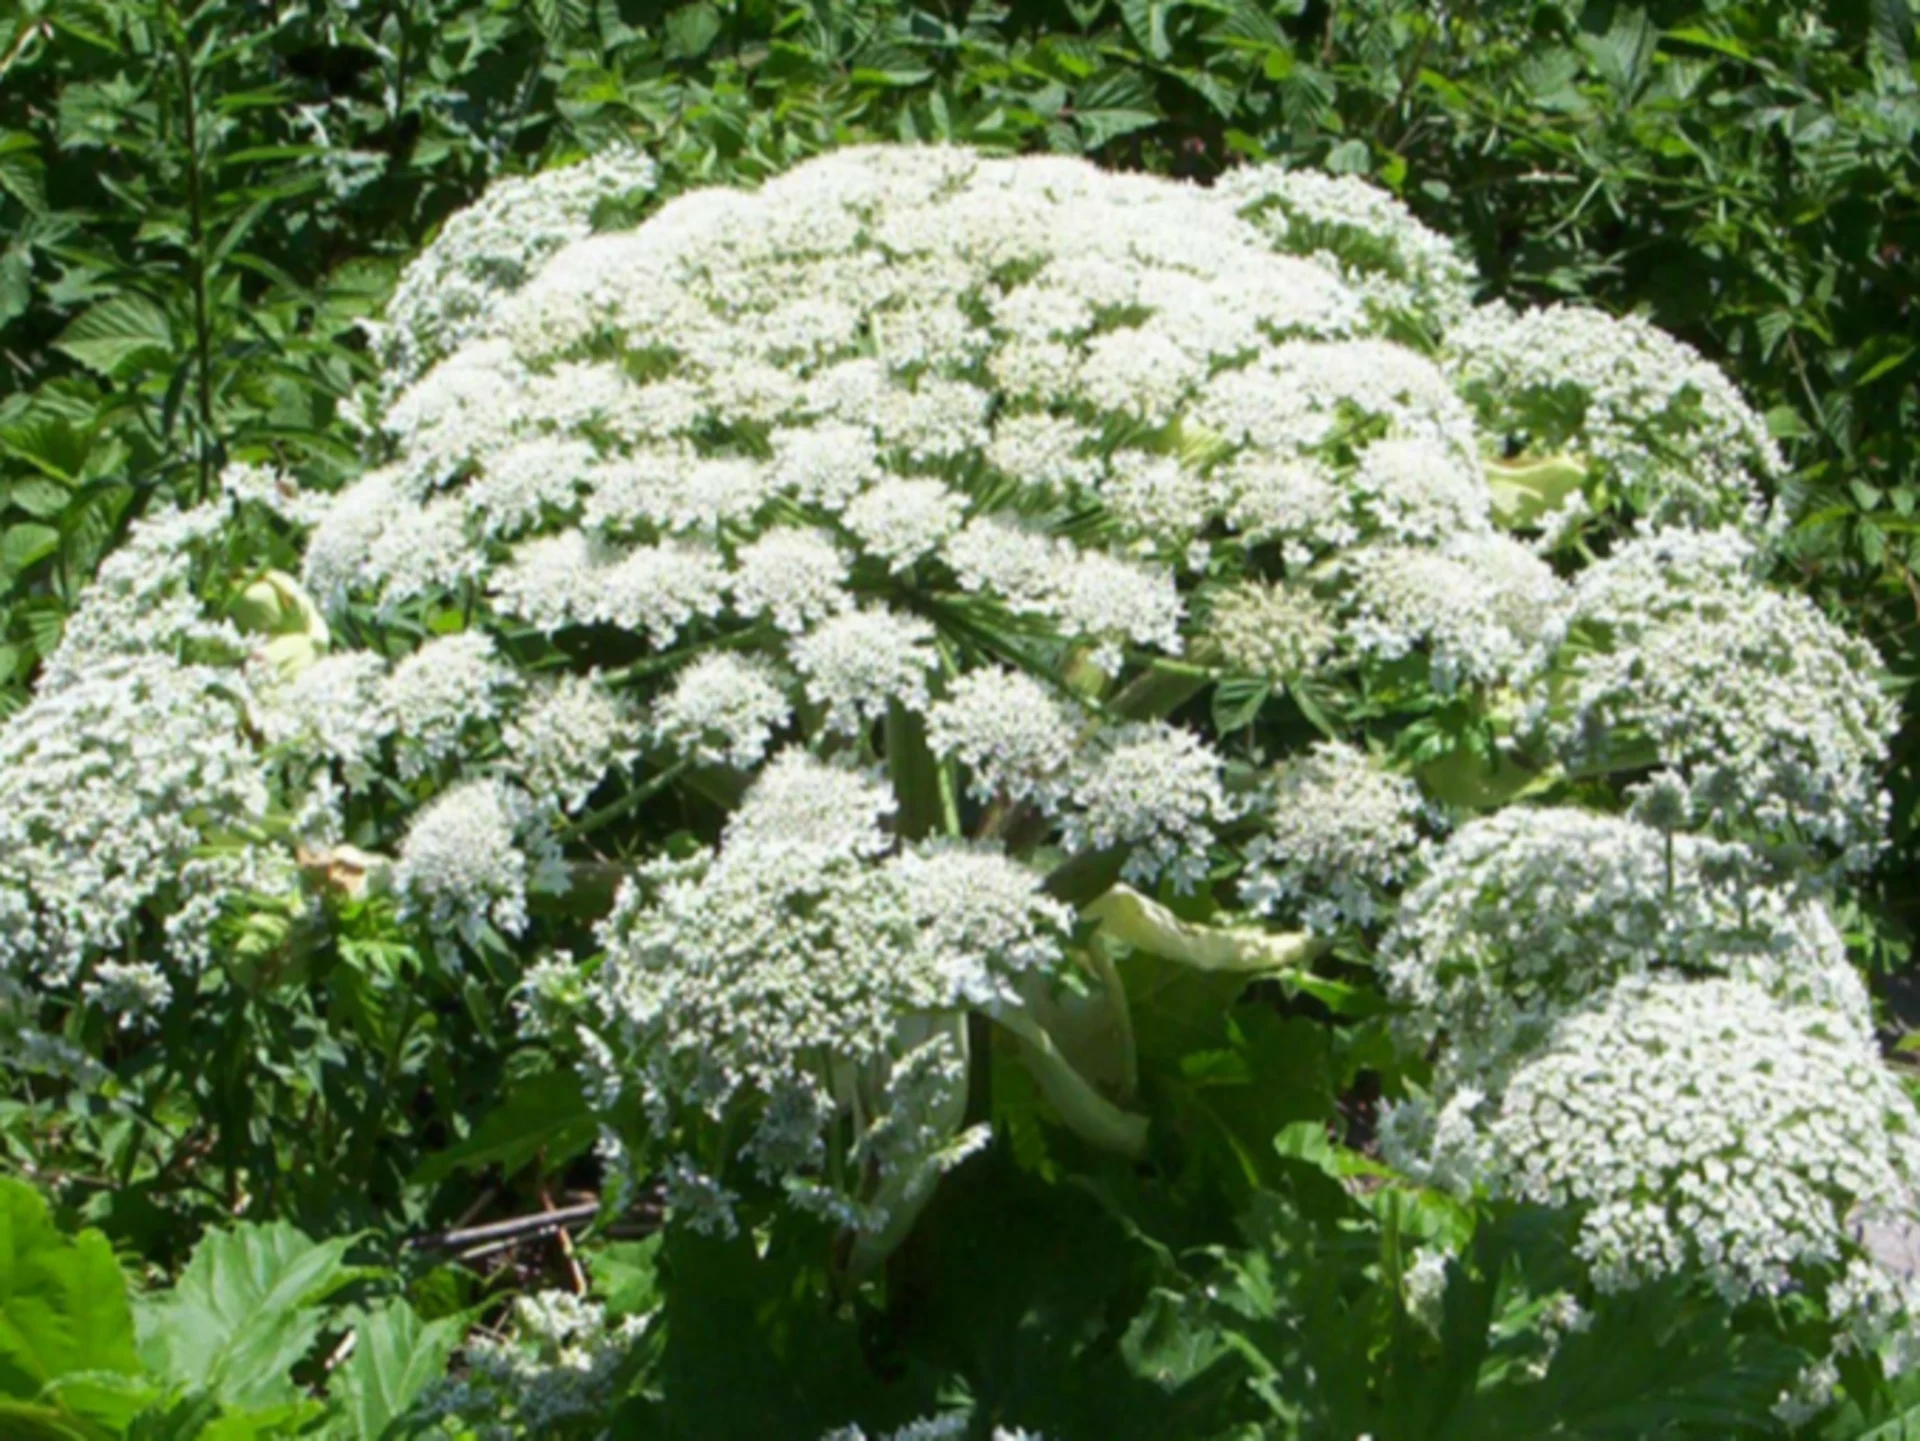 AVOID AT ALL COSTS: Giant hogweed blooms across Ontario. See why this plant is so dangerous